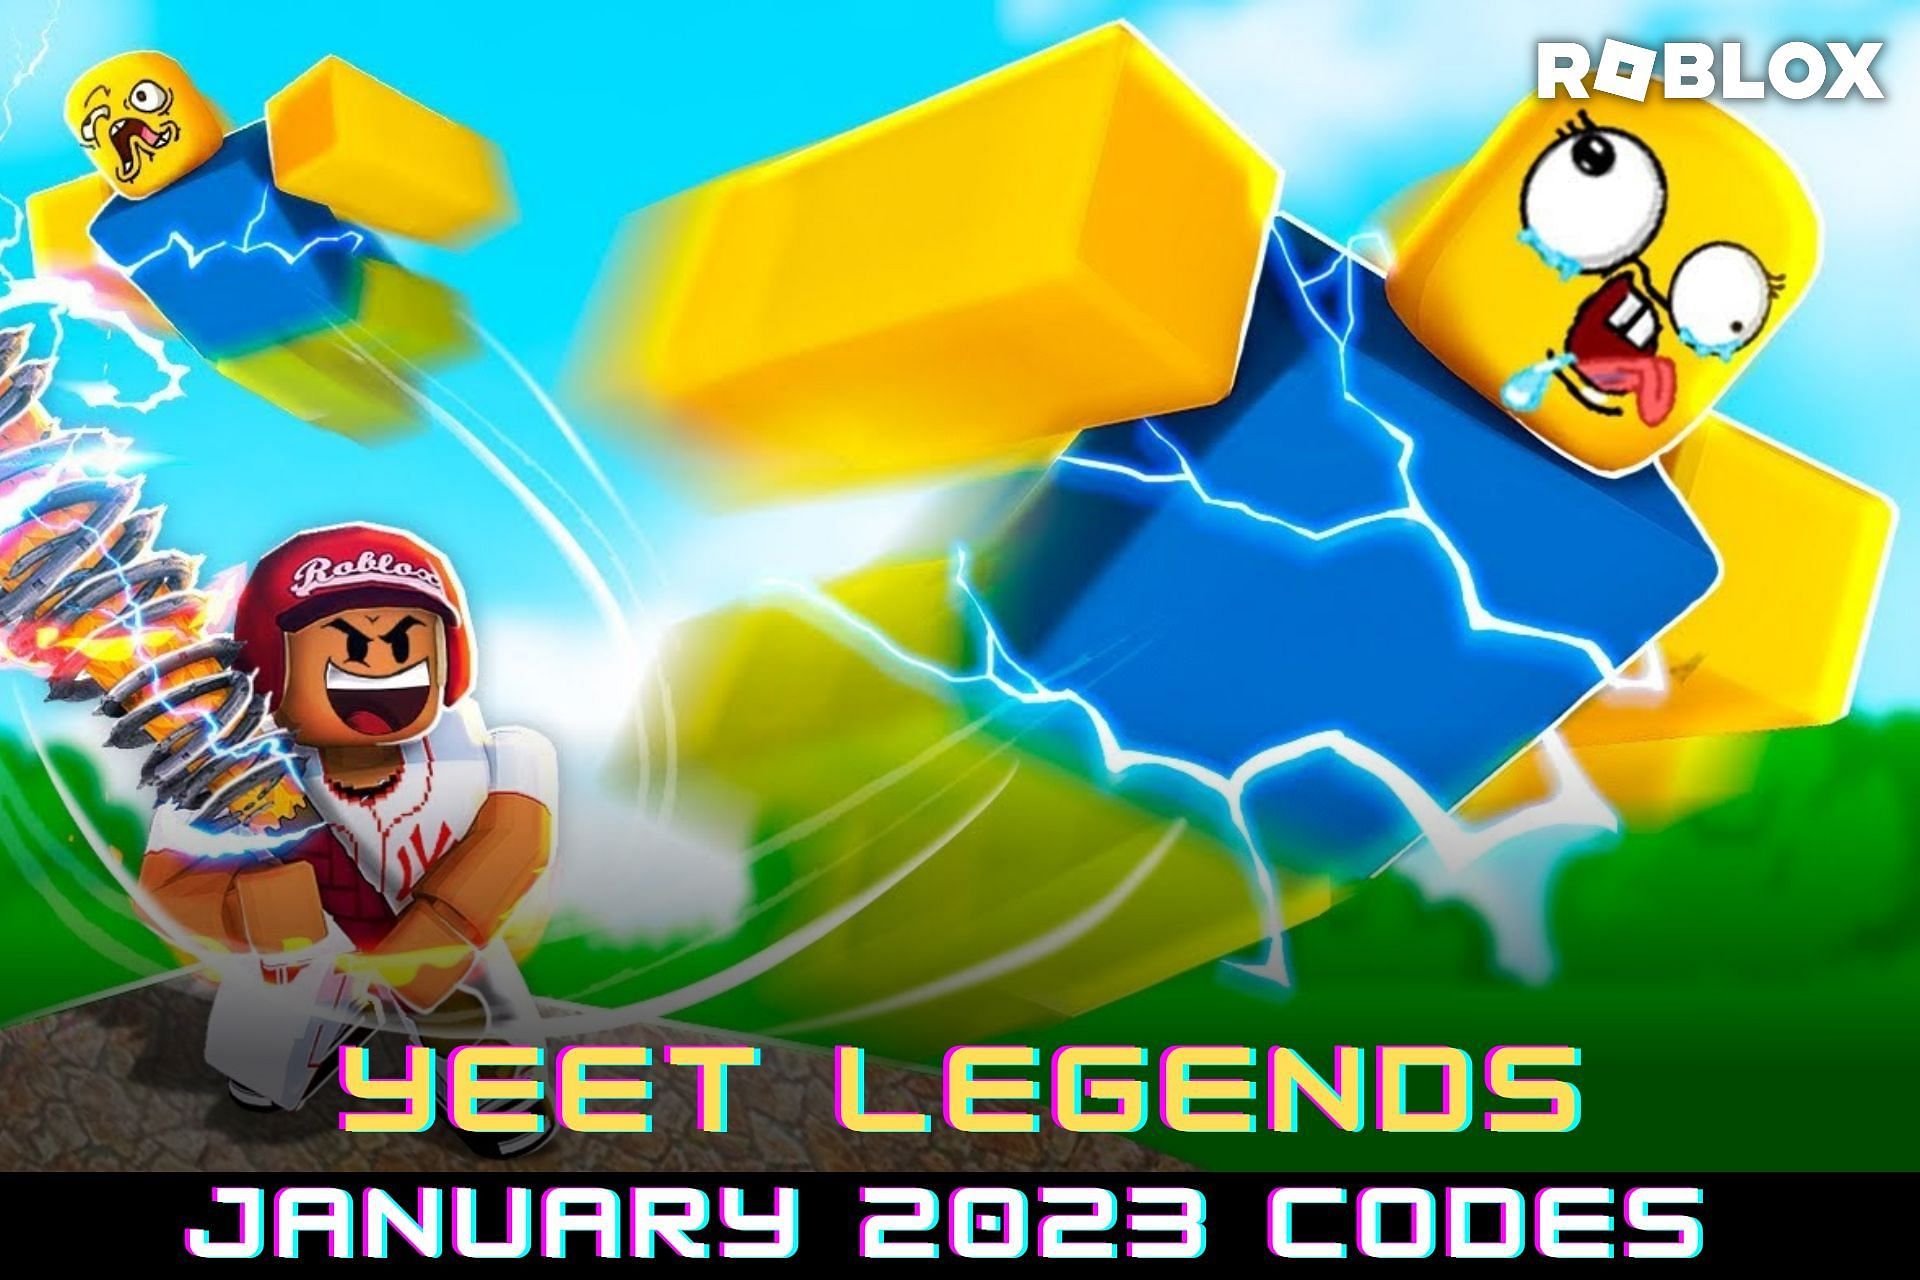 Roblox Legends Of Speed Codes 2023 